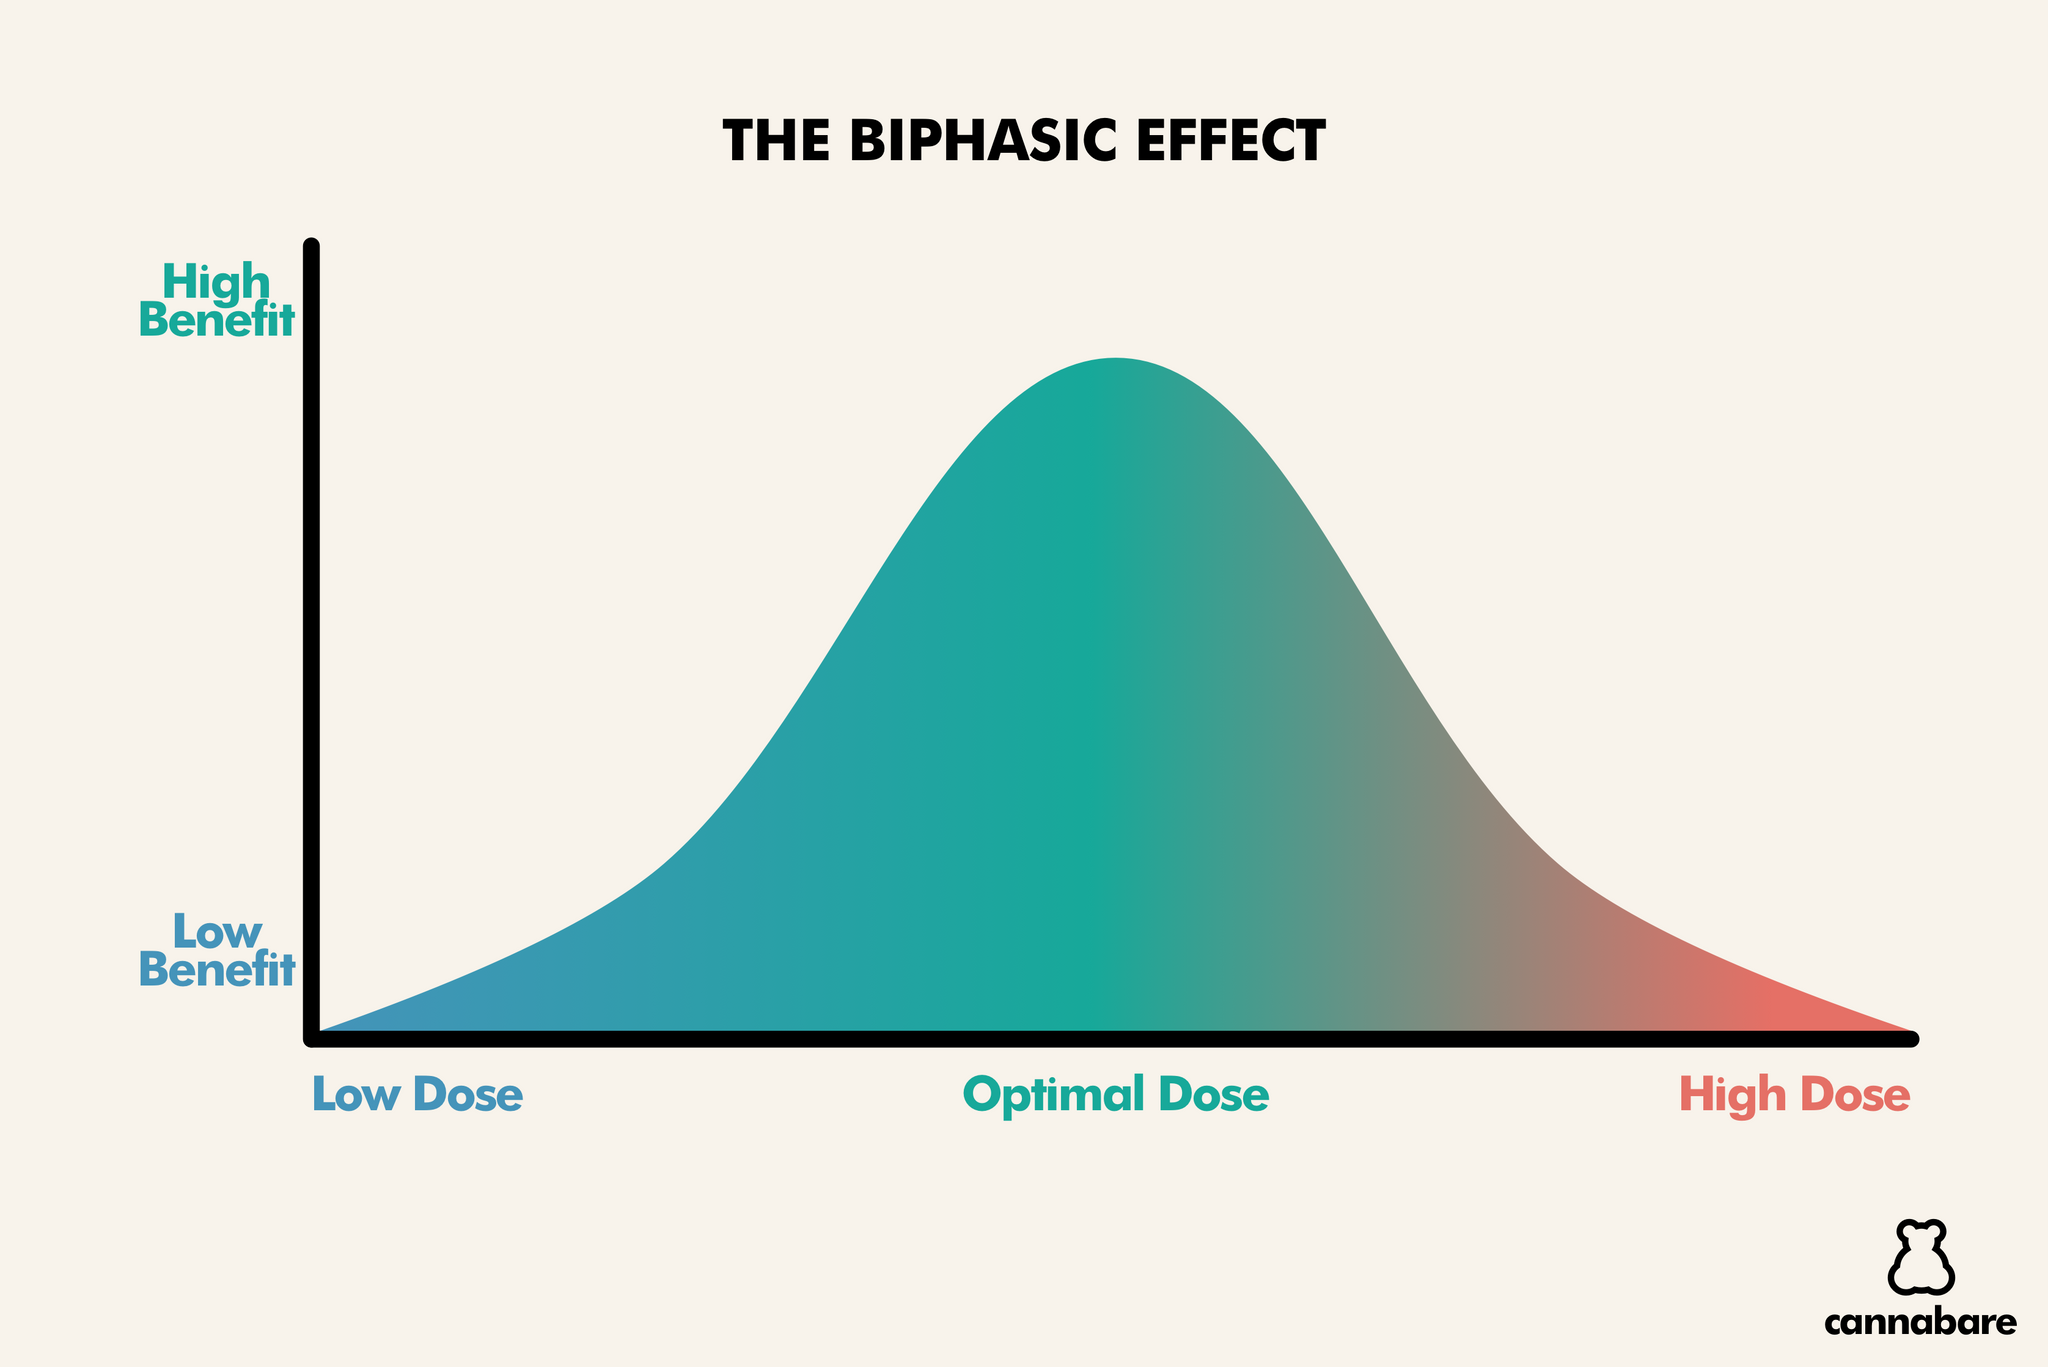 THE BIPHASIC EFFECT